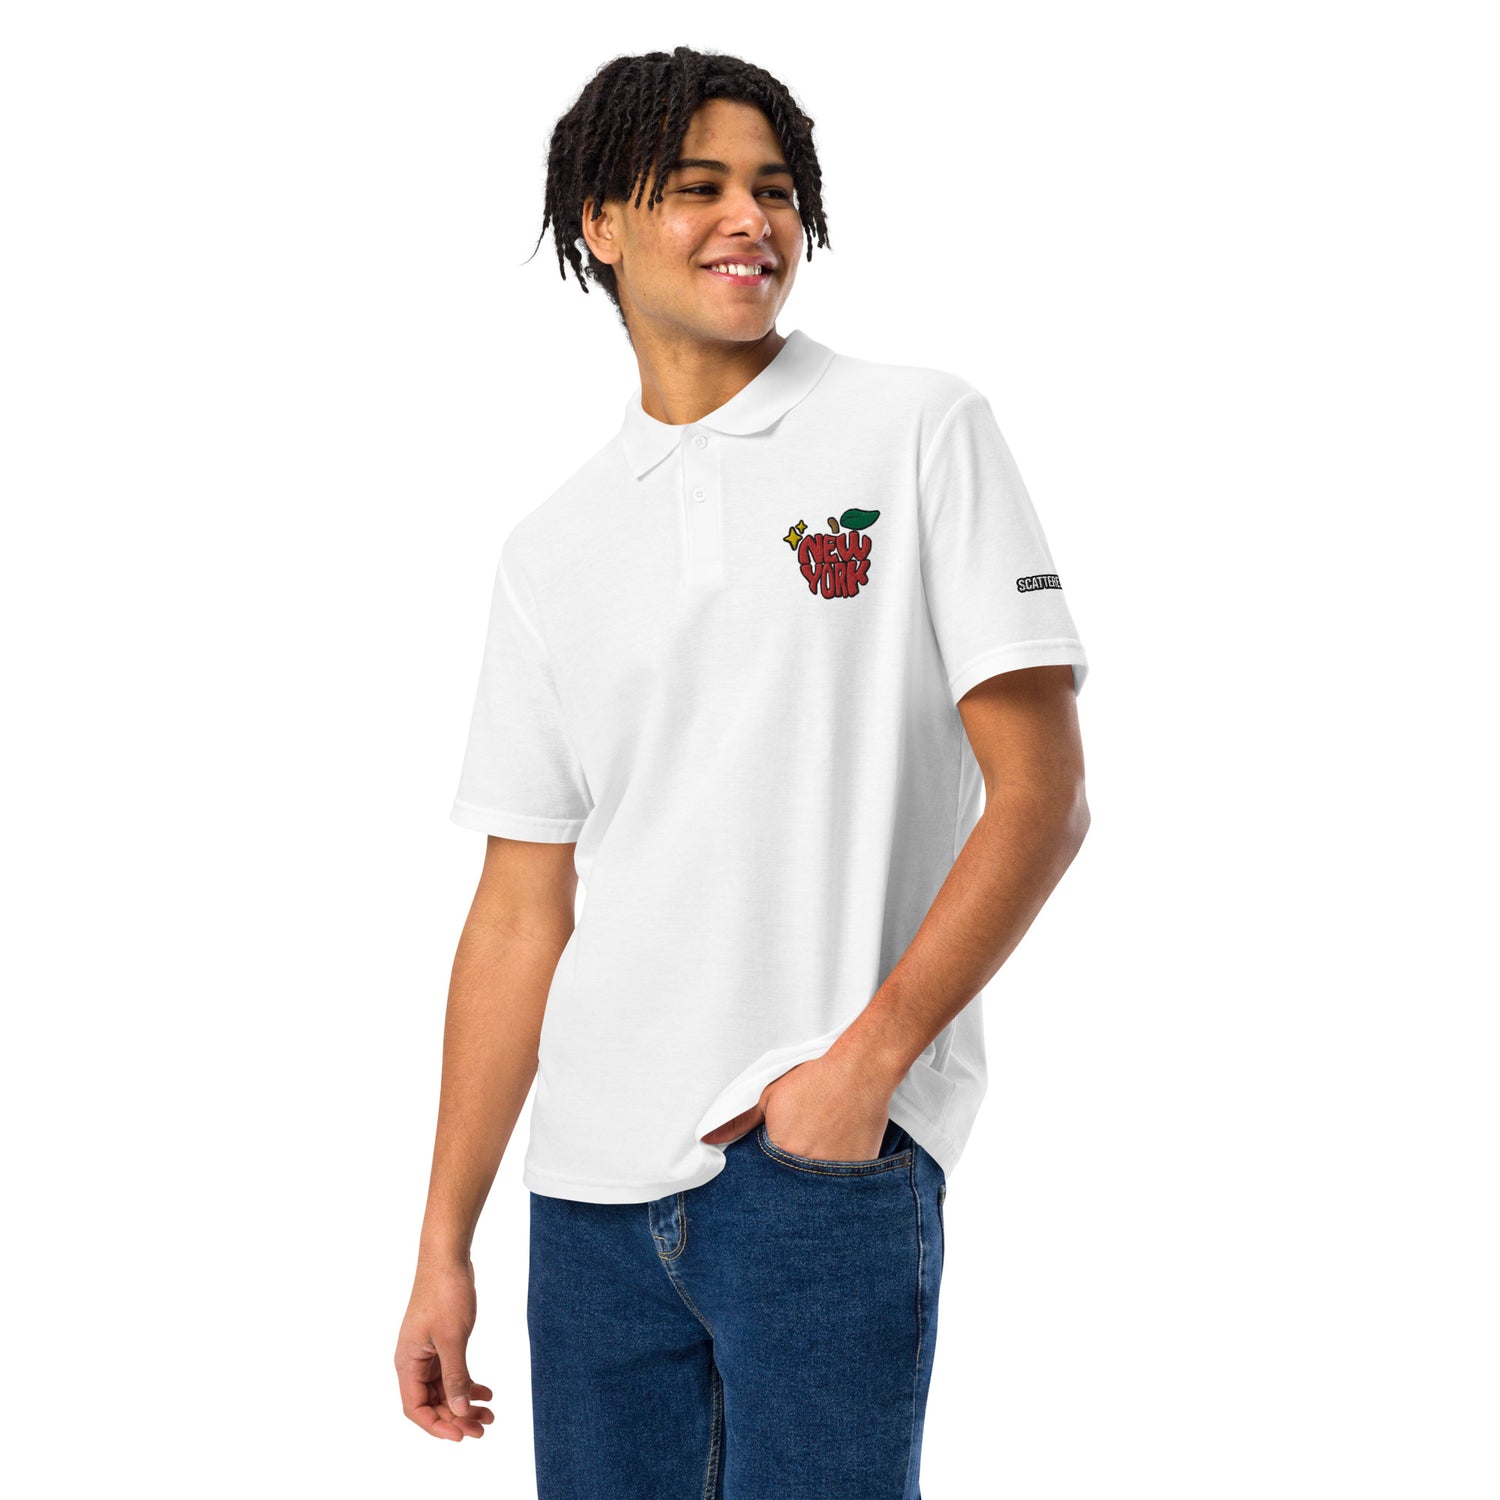 New York Apple Logo Embroidered White Polo Shirt Scattered Streetwear